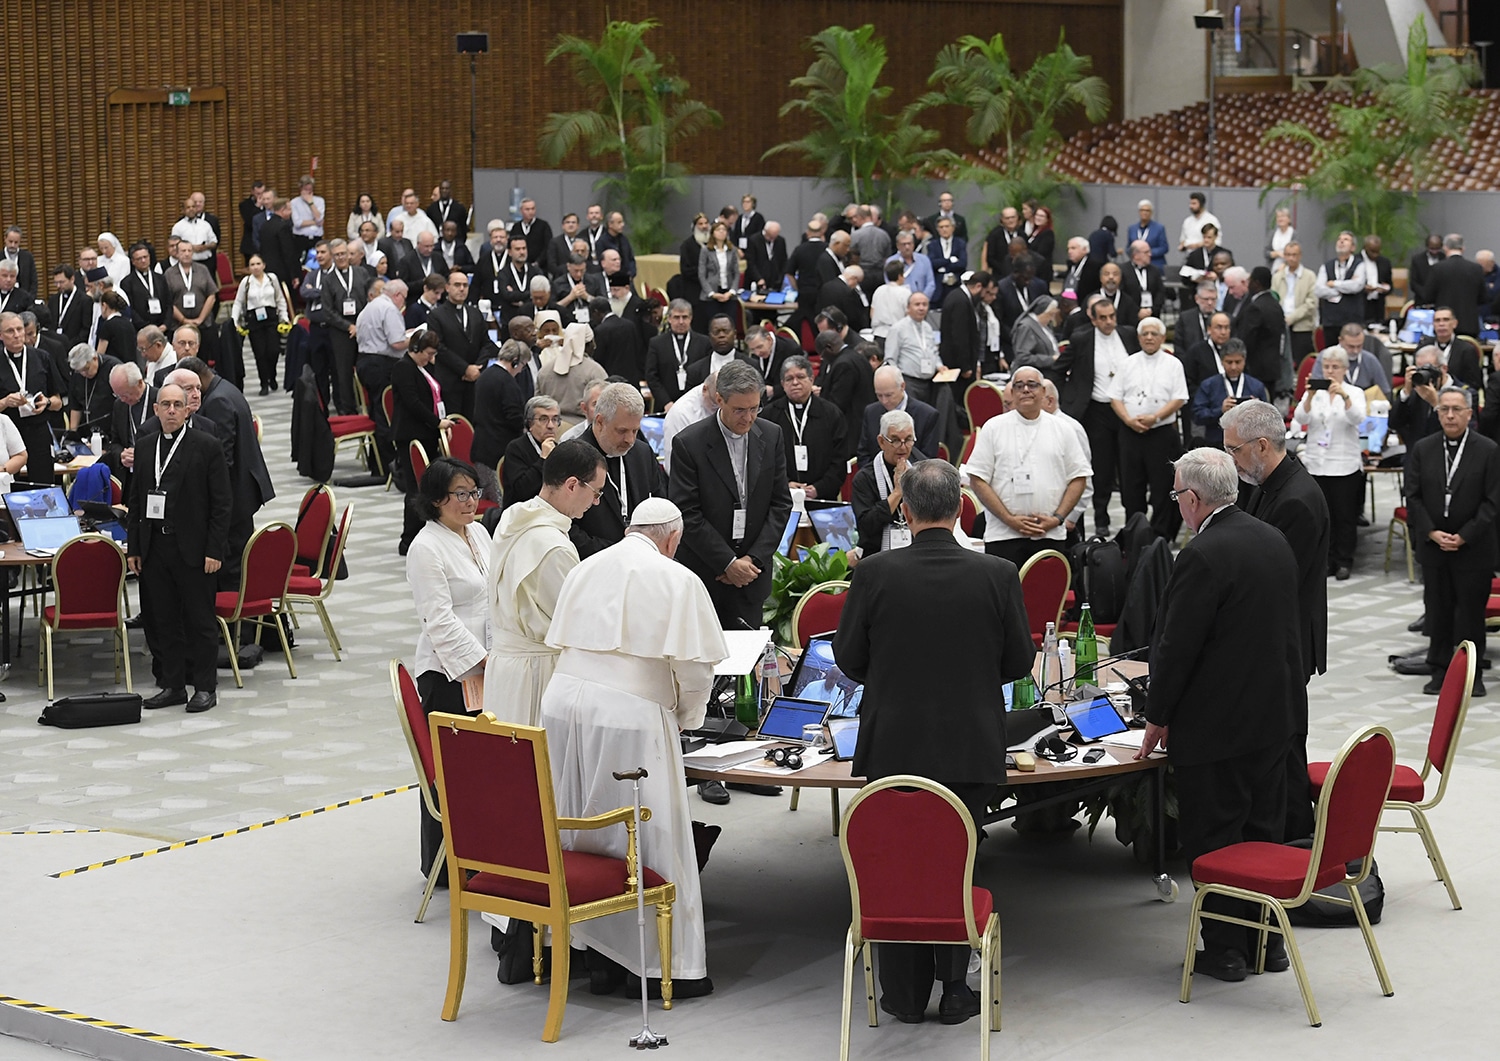 synod role of the laity